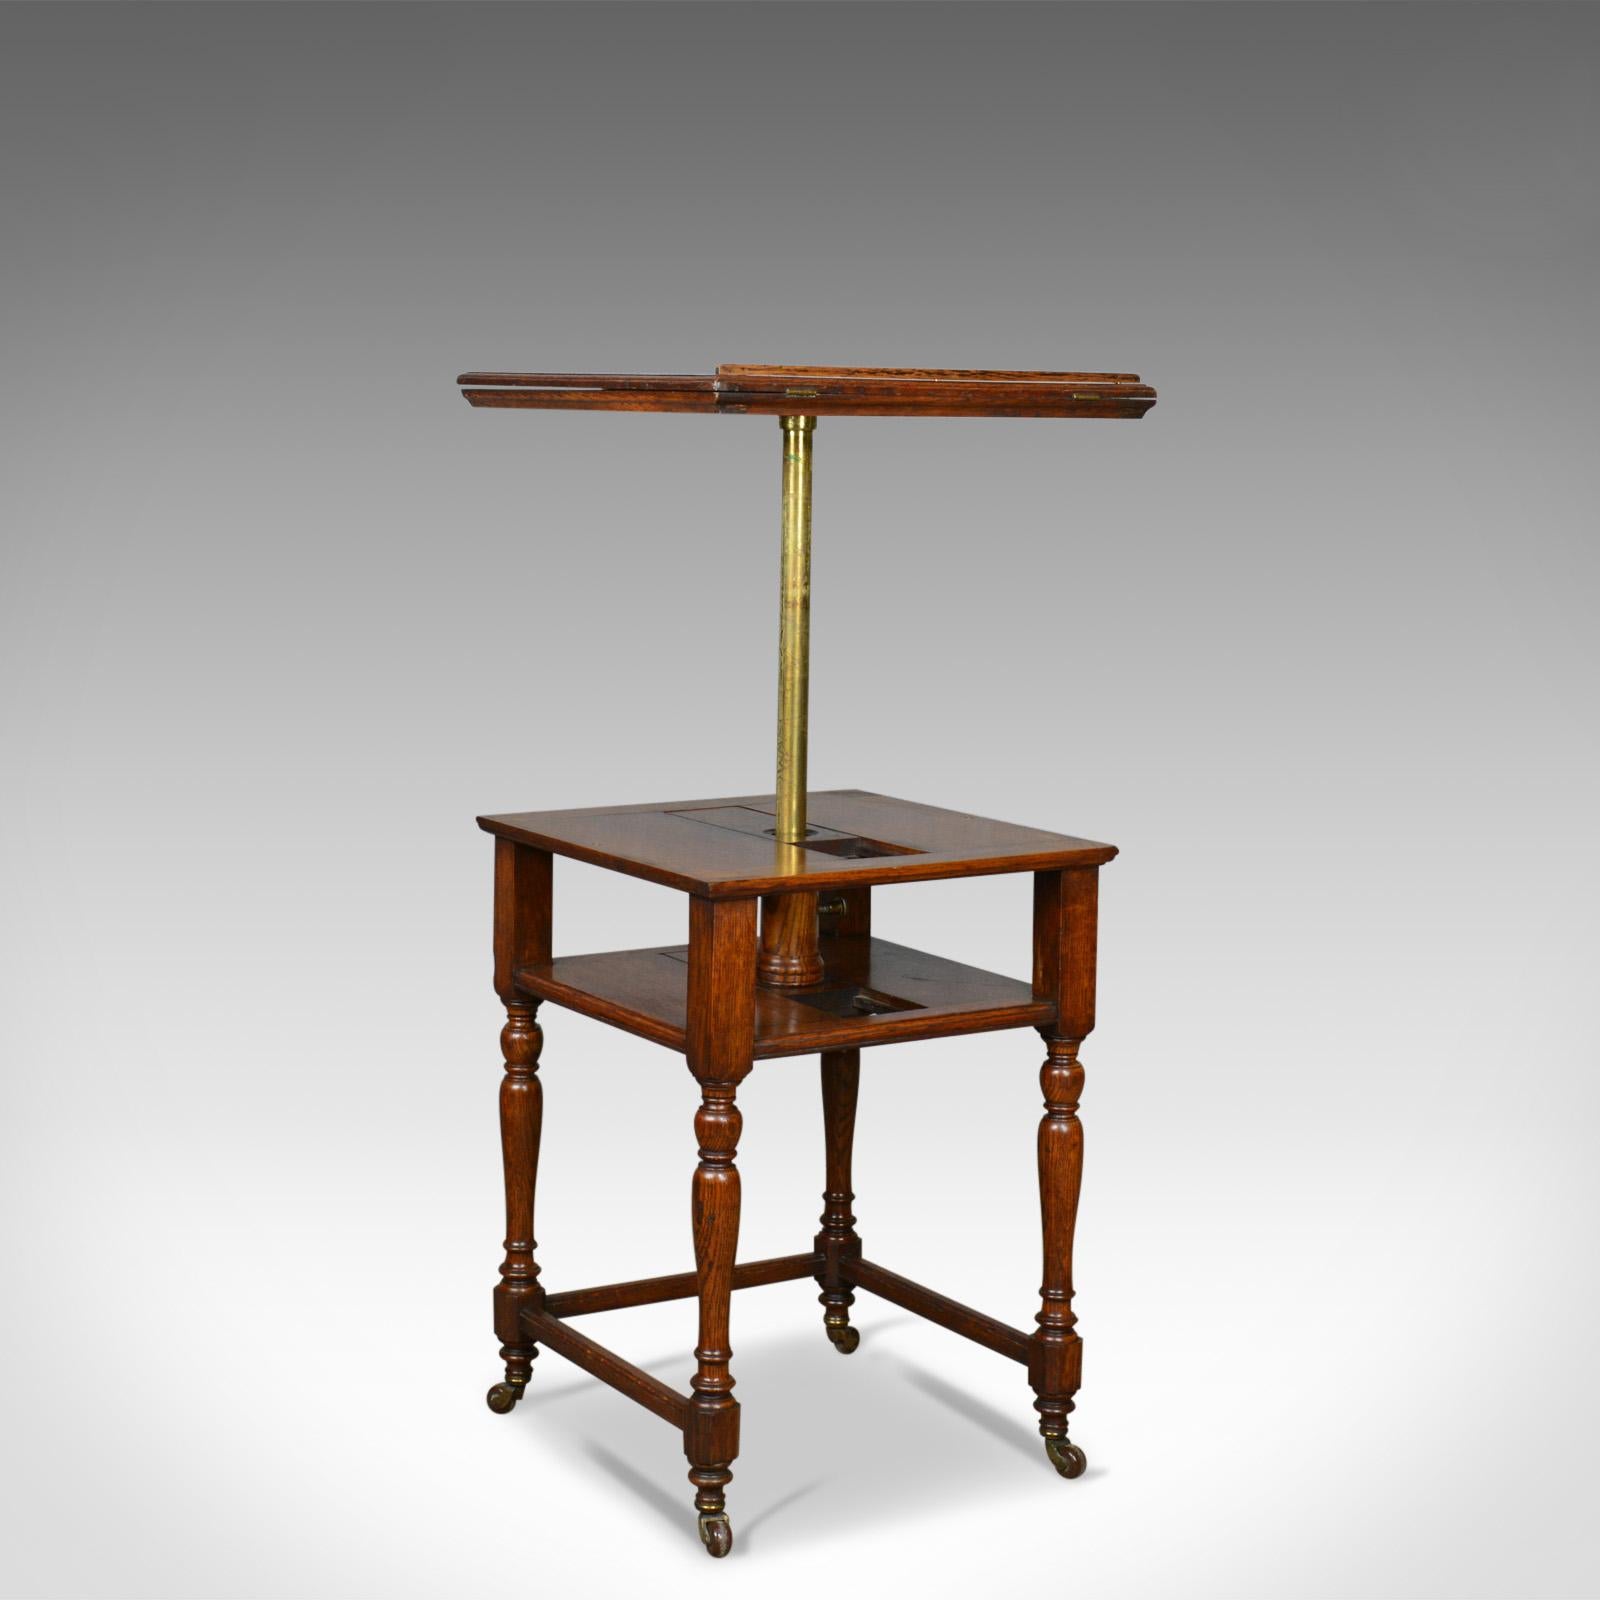 This is an antique metamorphic side table lectern, an English, Victorian, oak library reading table dating to the mid-19th century, circa 1860.

English oak with a deep, warm russet hue
Grain interest, wisps of medullary rays and a desirable aged